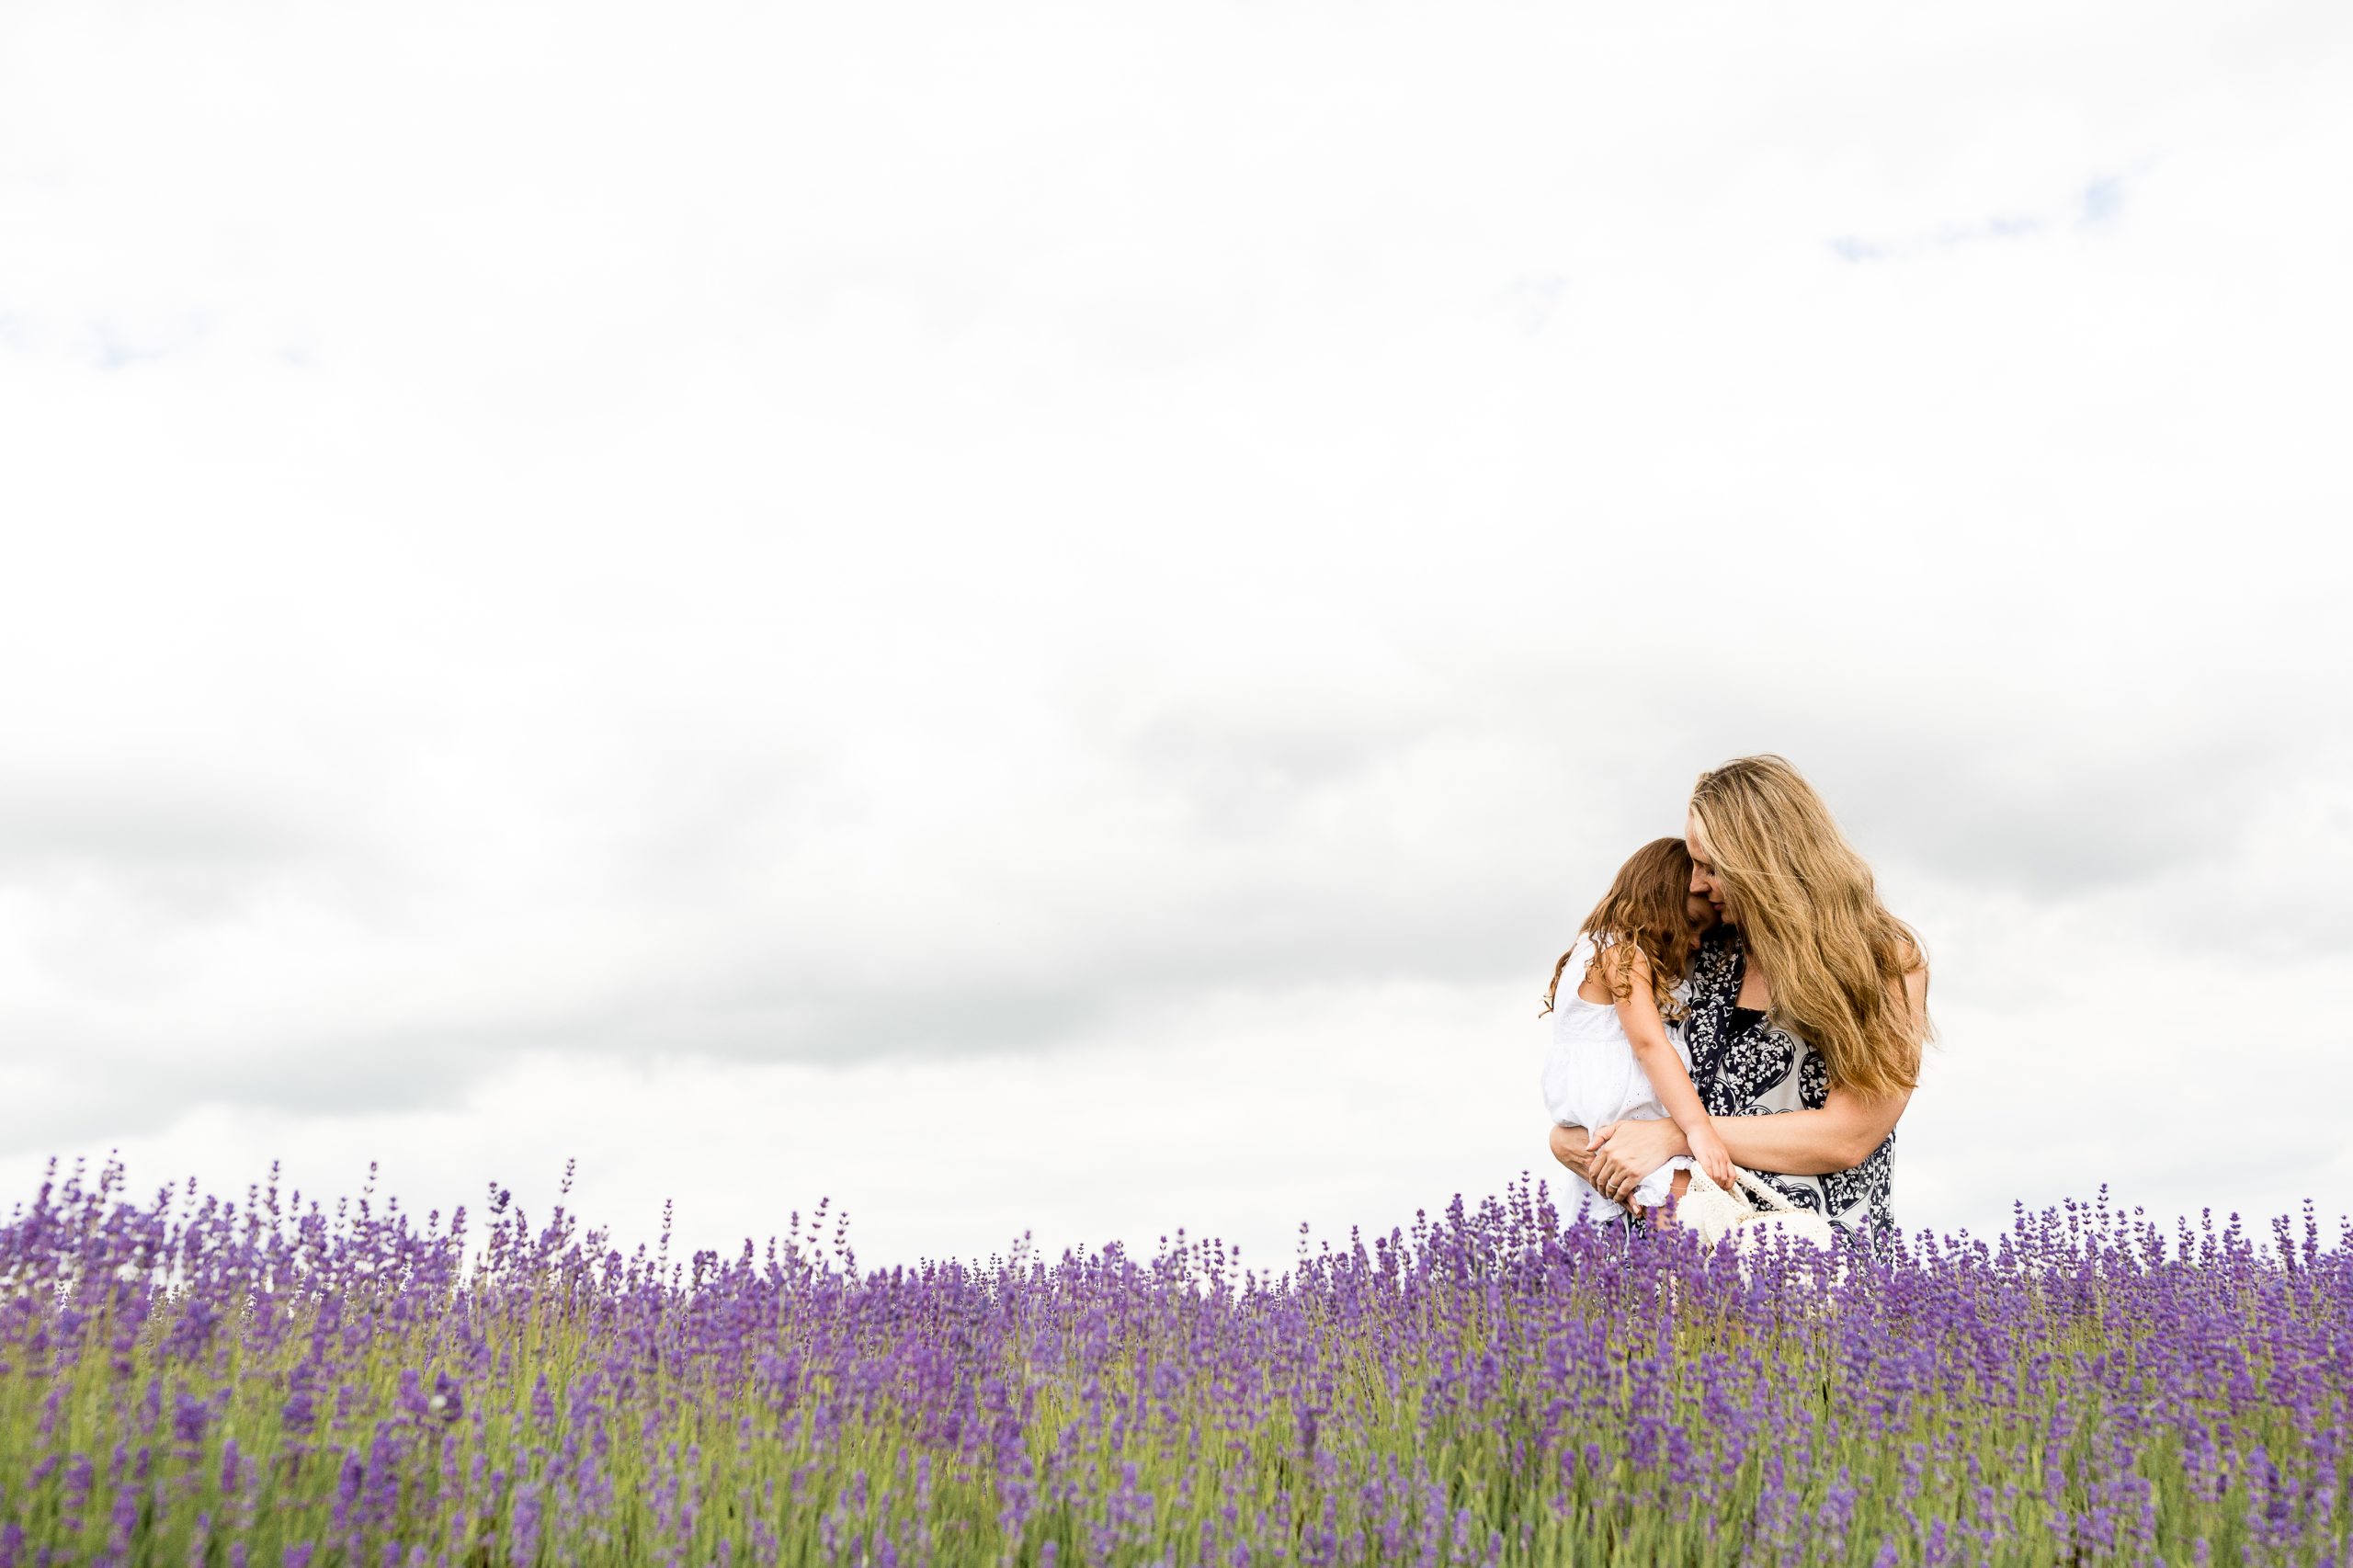 mum and daughter as hugging in the field